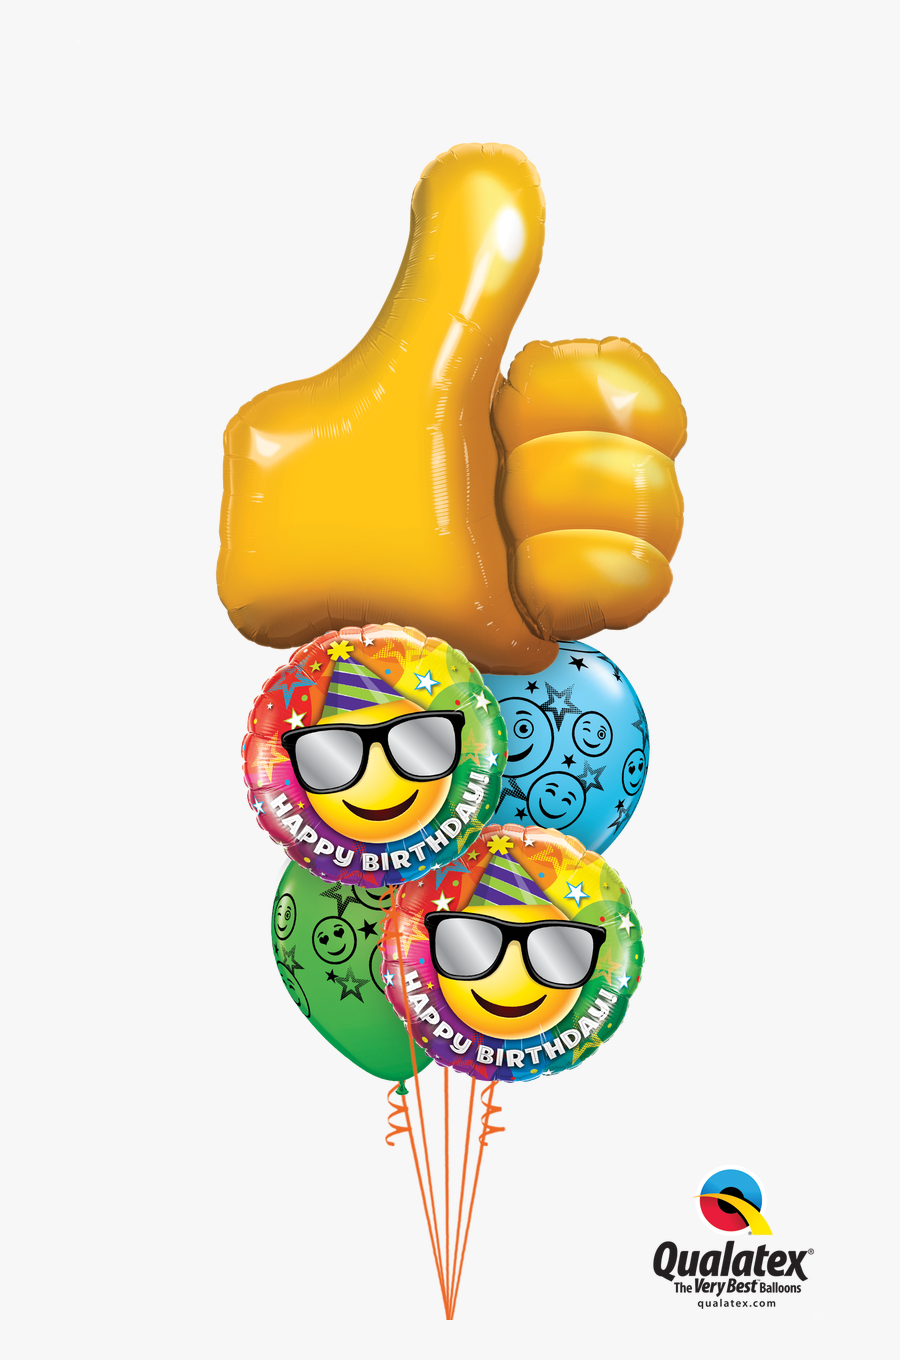 Thumbs Up Birthday Bouquet - Thumbs Up Balloon, Transparent Clipart